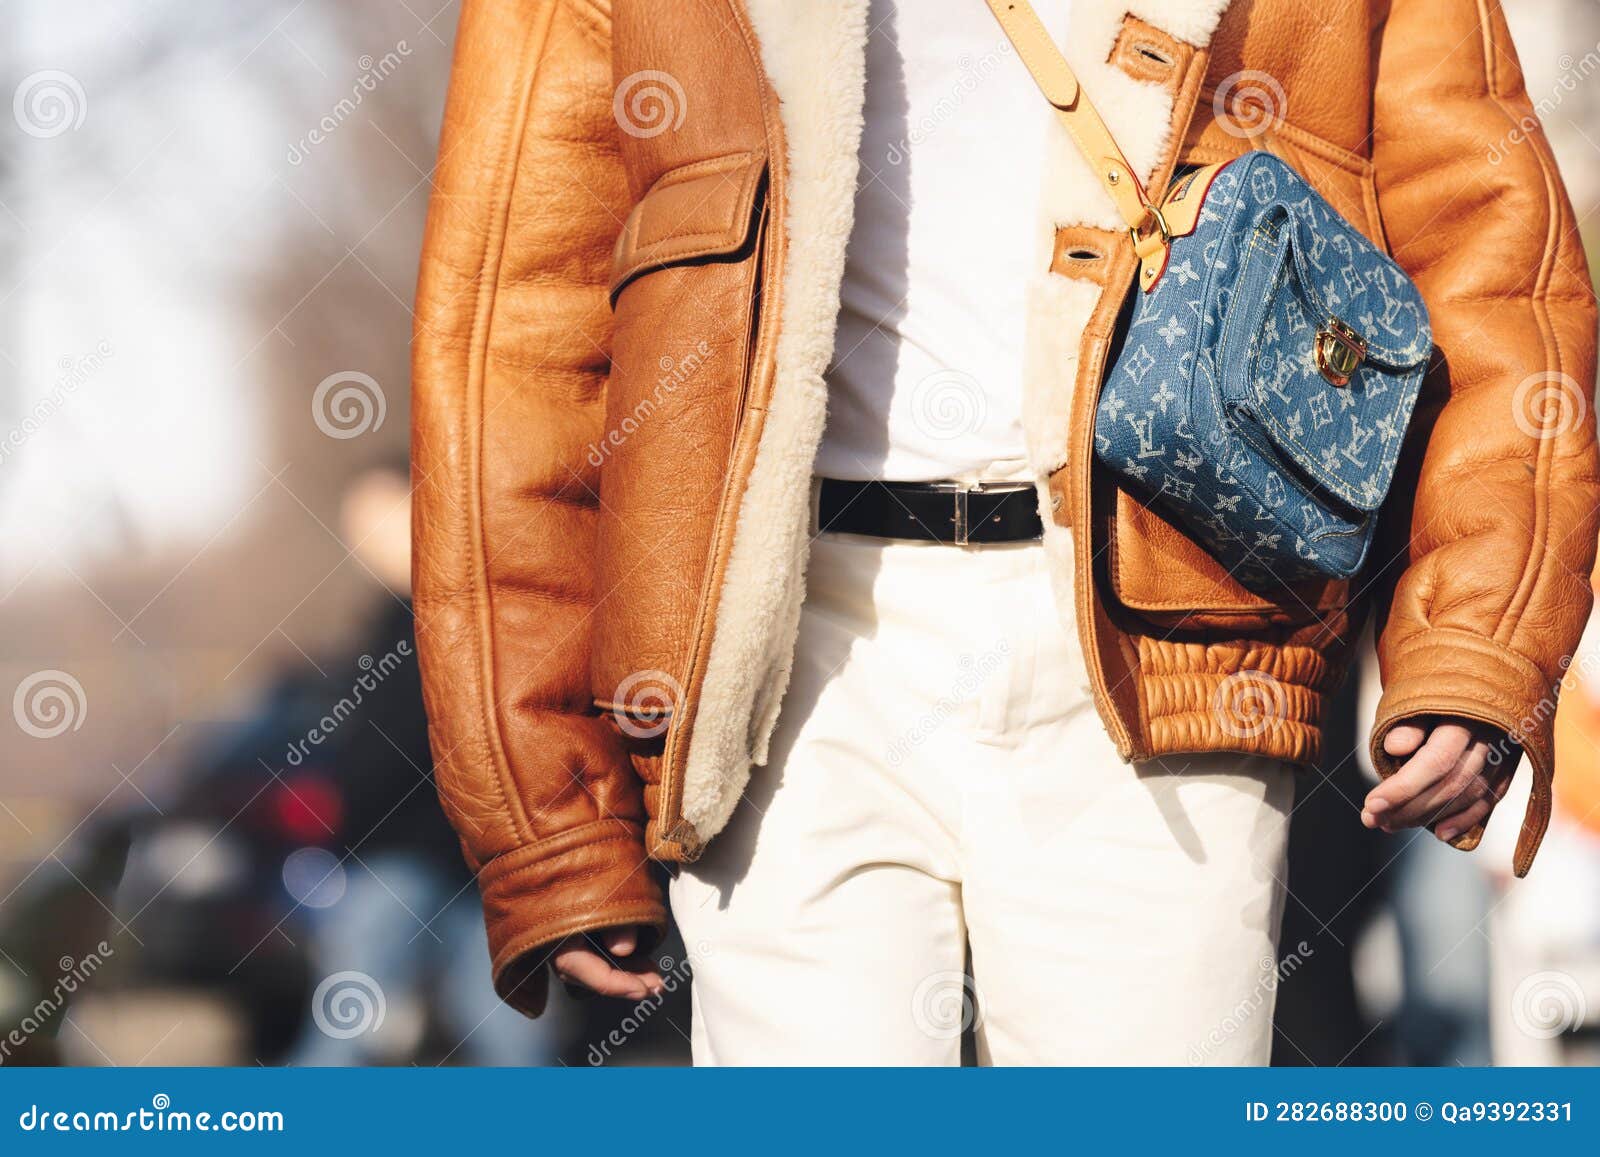 445 Louis Vuitton Handbag Stock Photos - Free & Royalty-Free Stock Photos  from Dreamstime - Page 6